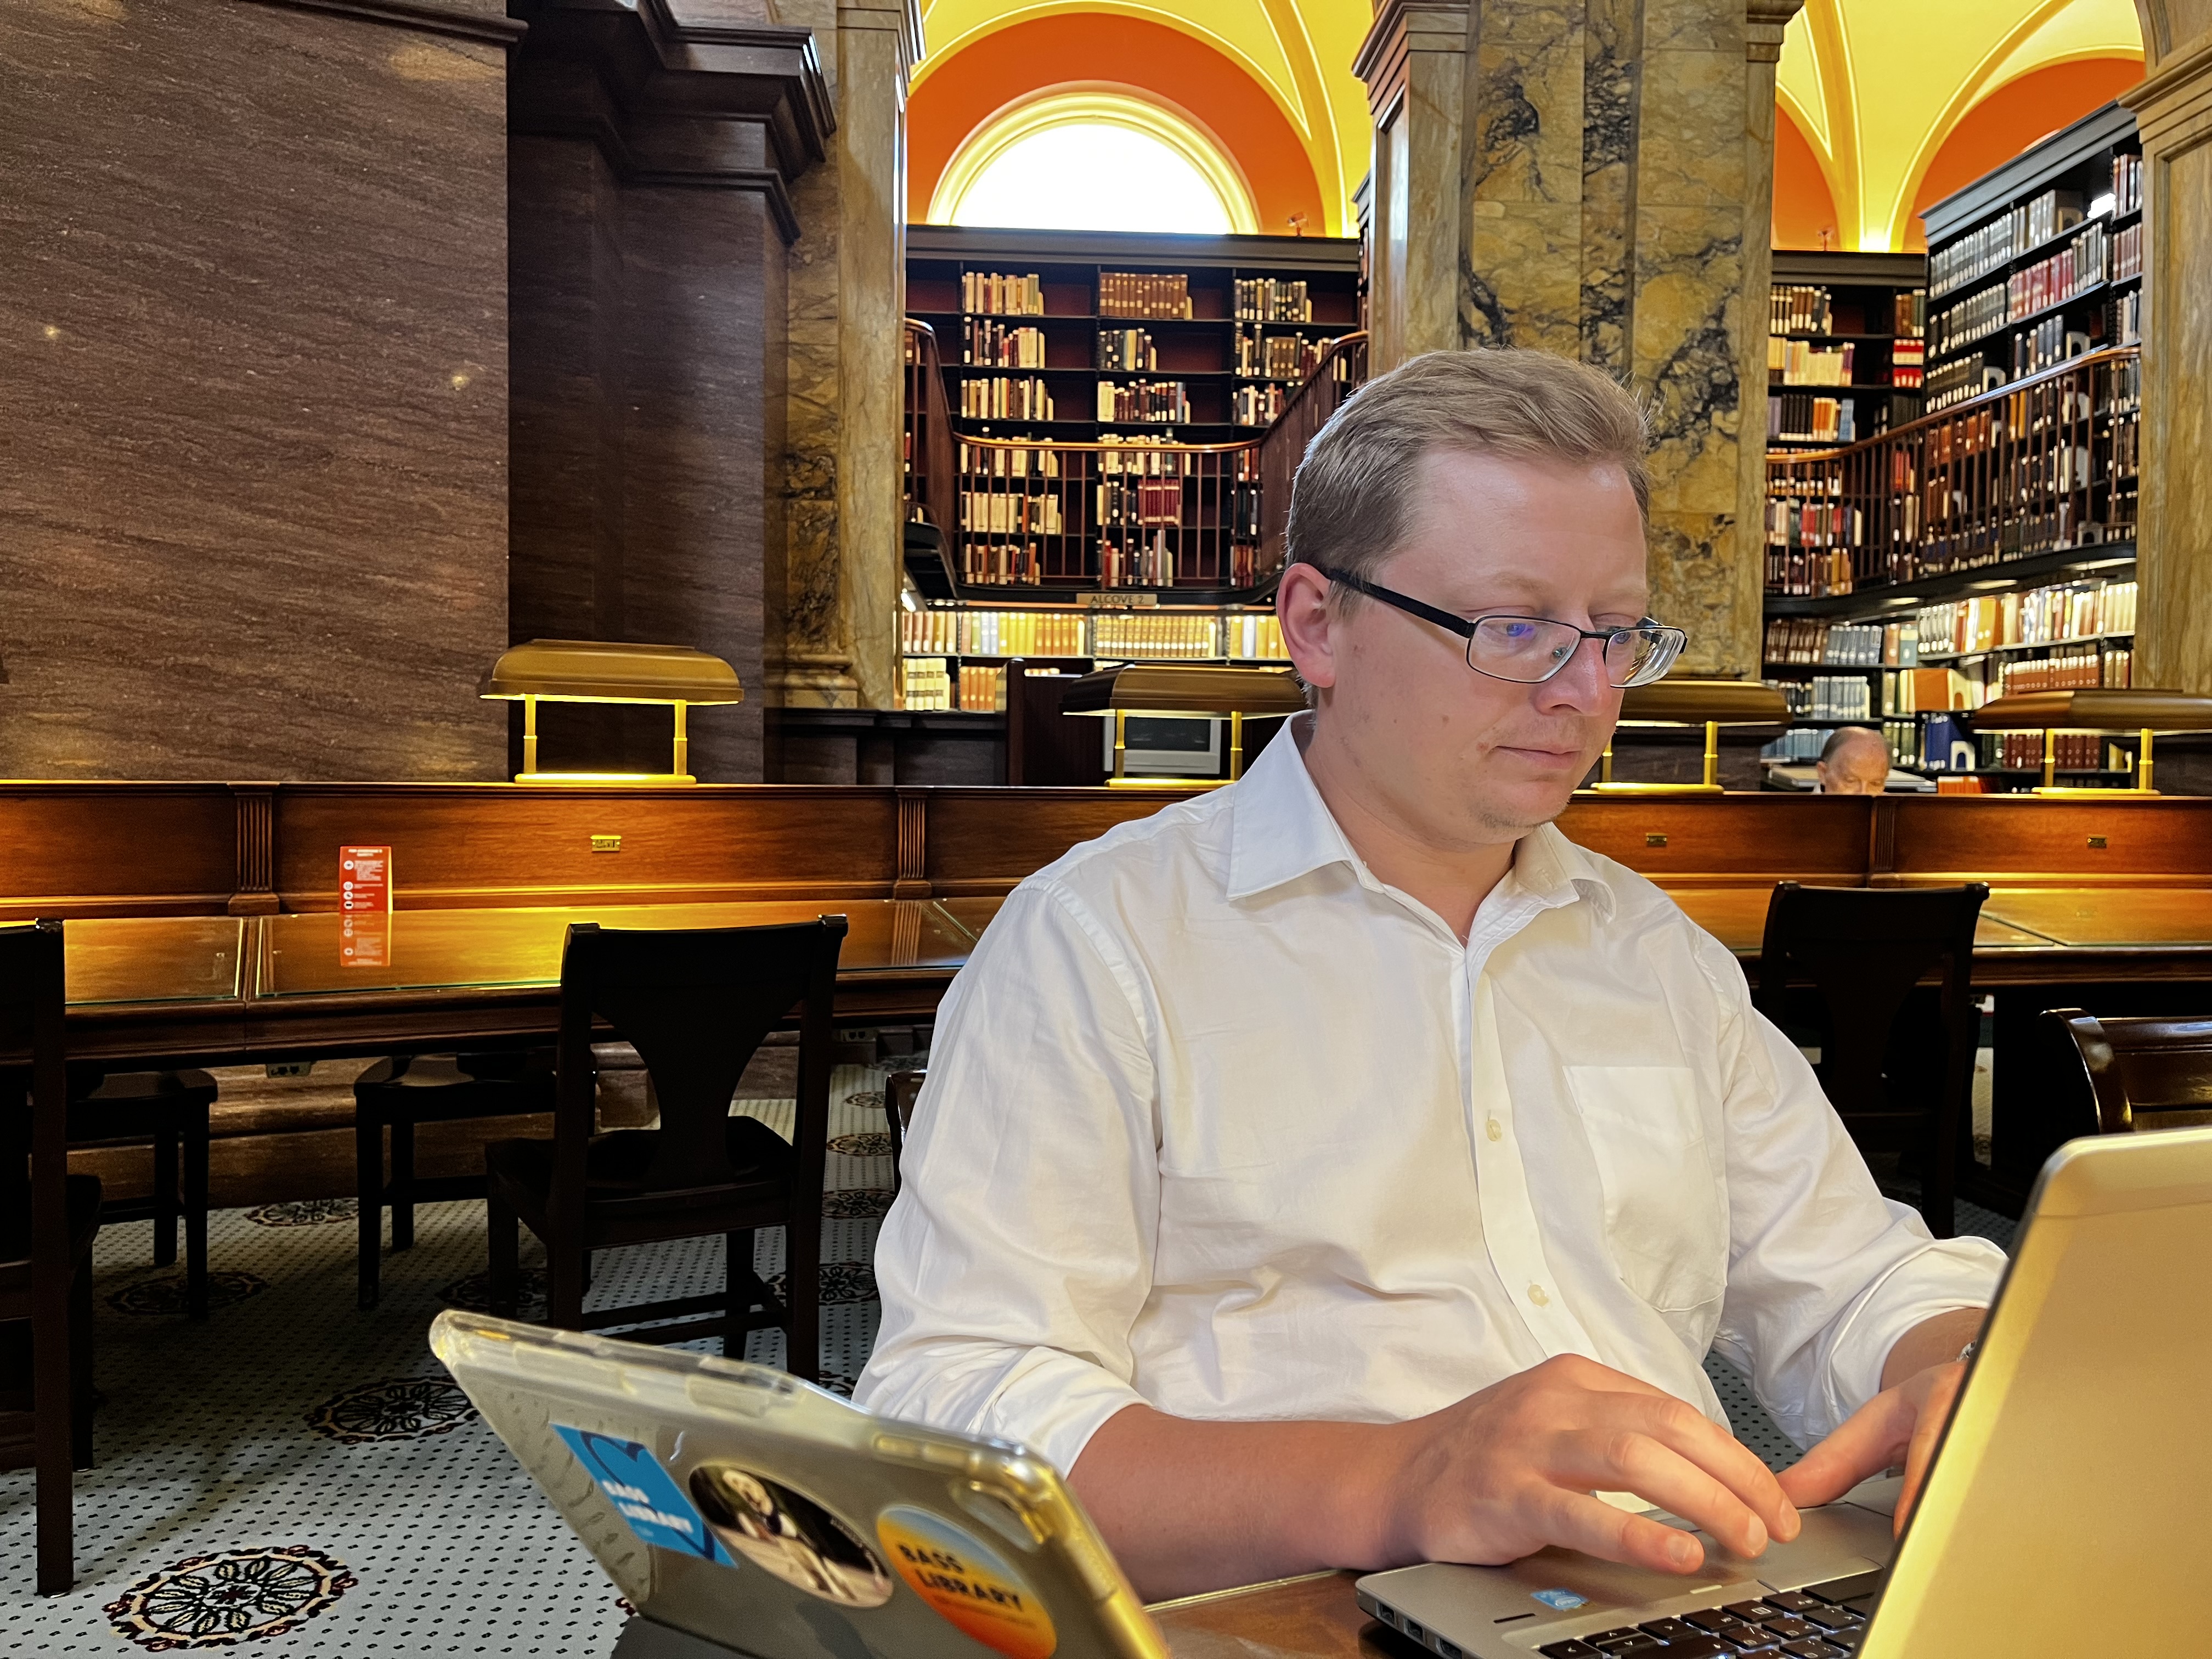 Konrad Szocik working on a laptop while sitting in an old library.